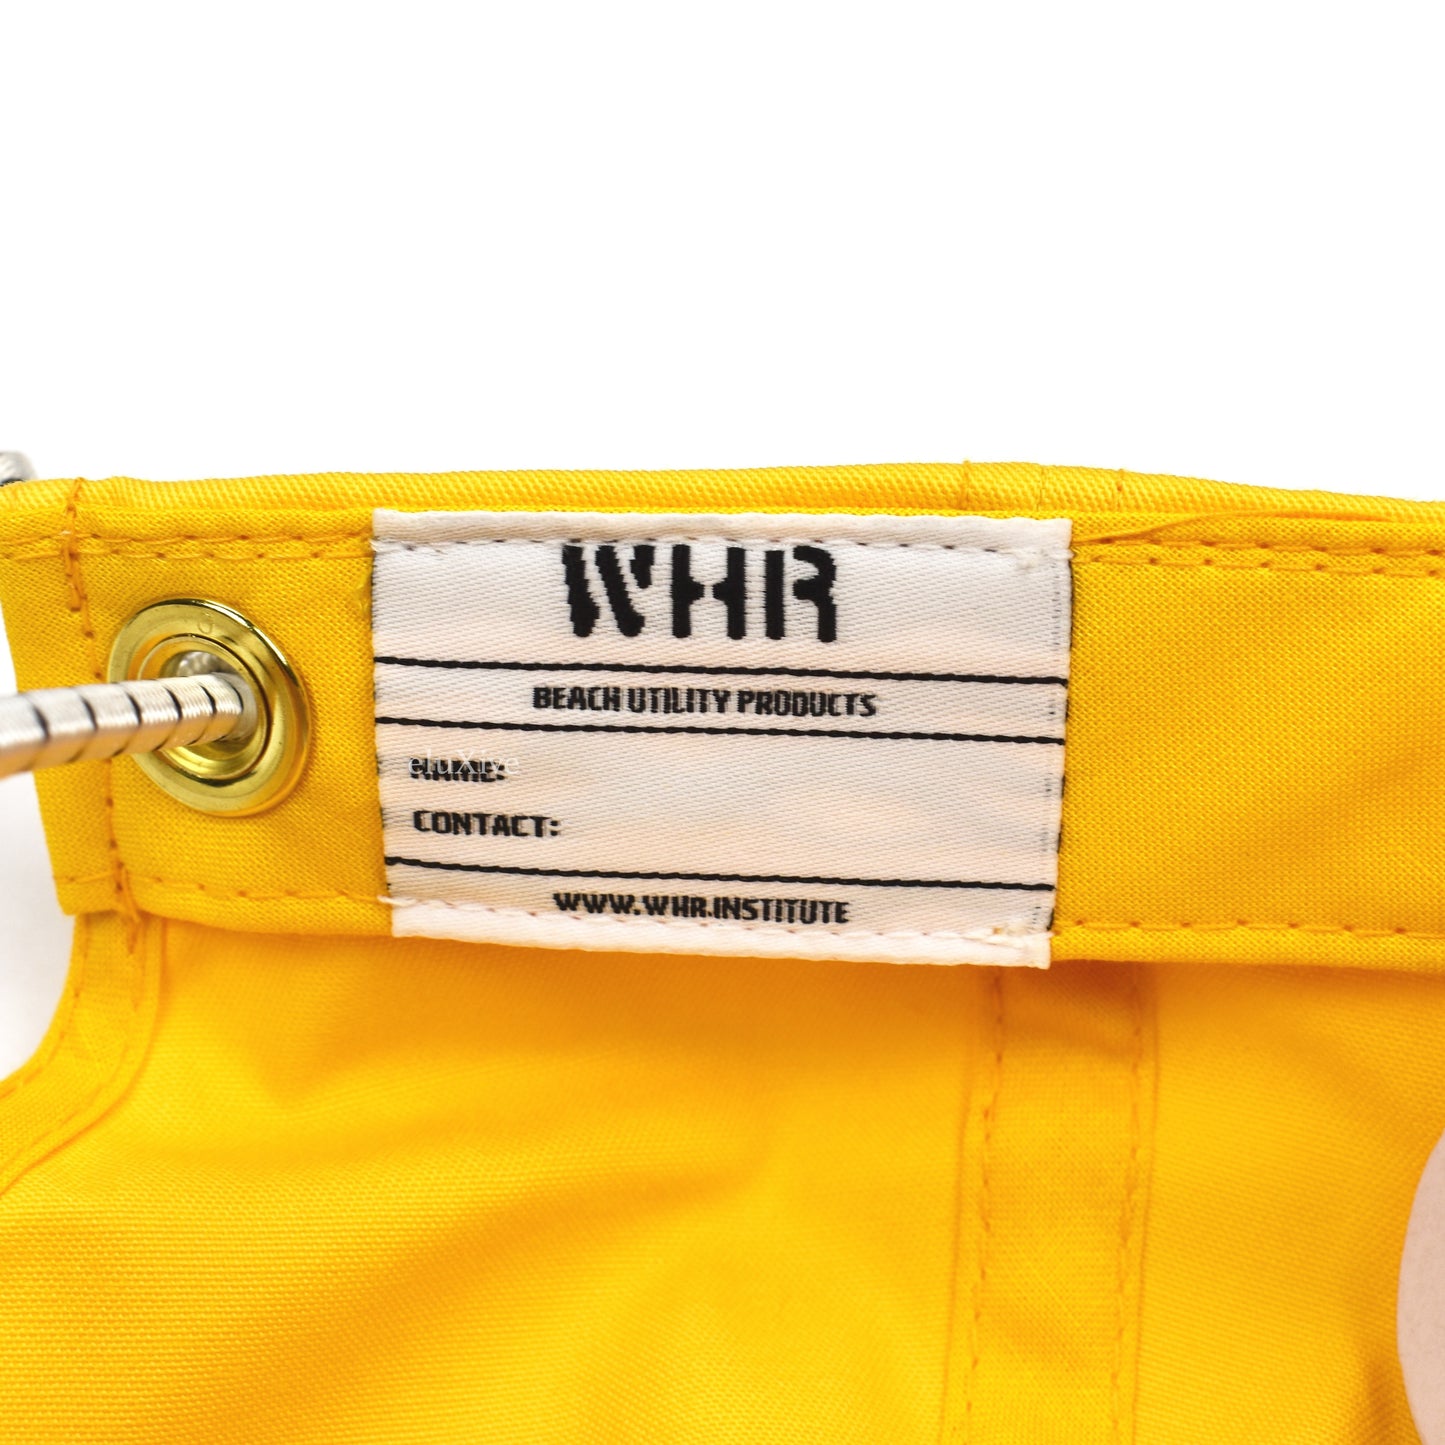 Western Hydrodynamic Research - WHR Promotional Hat (Yellow)